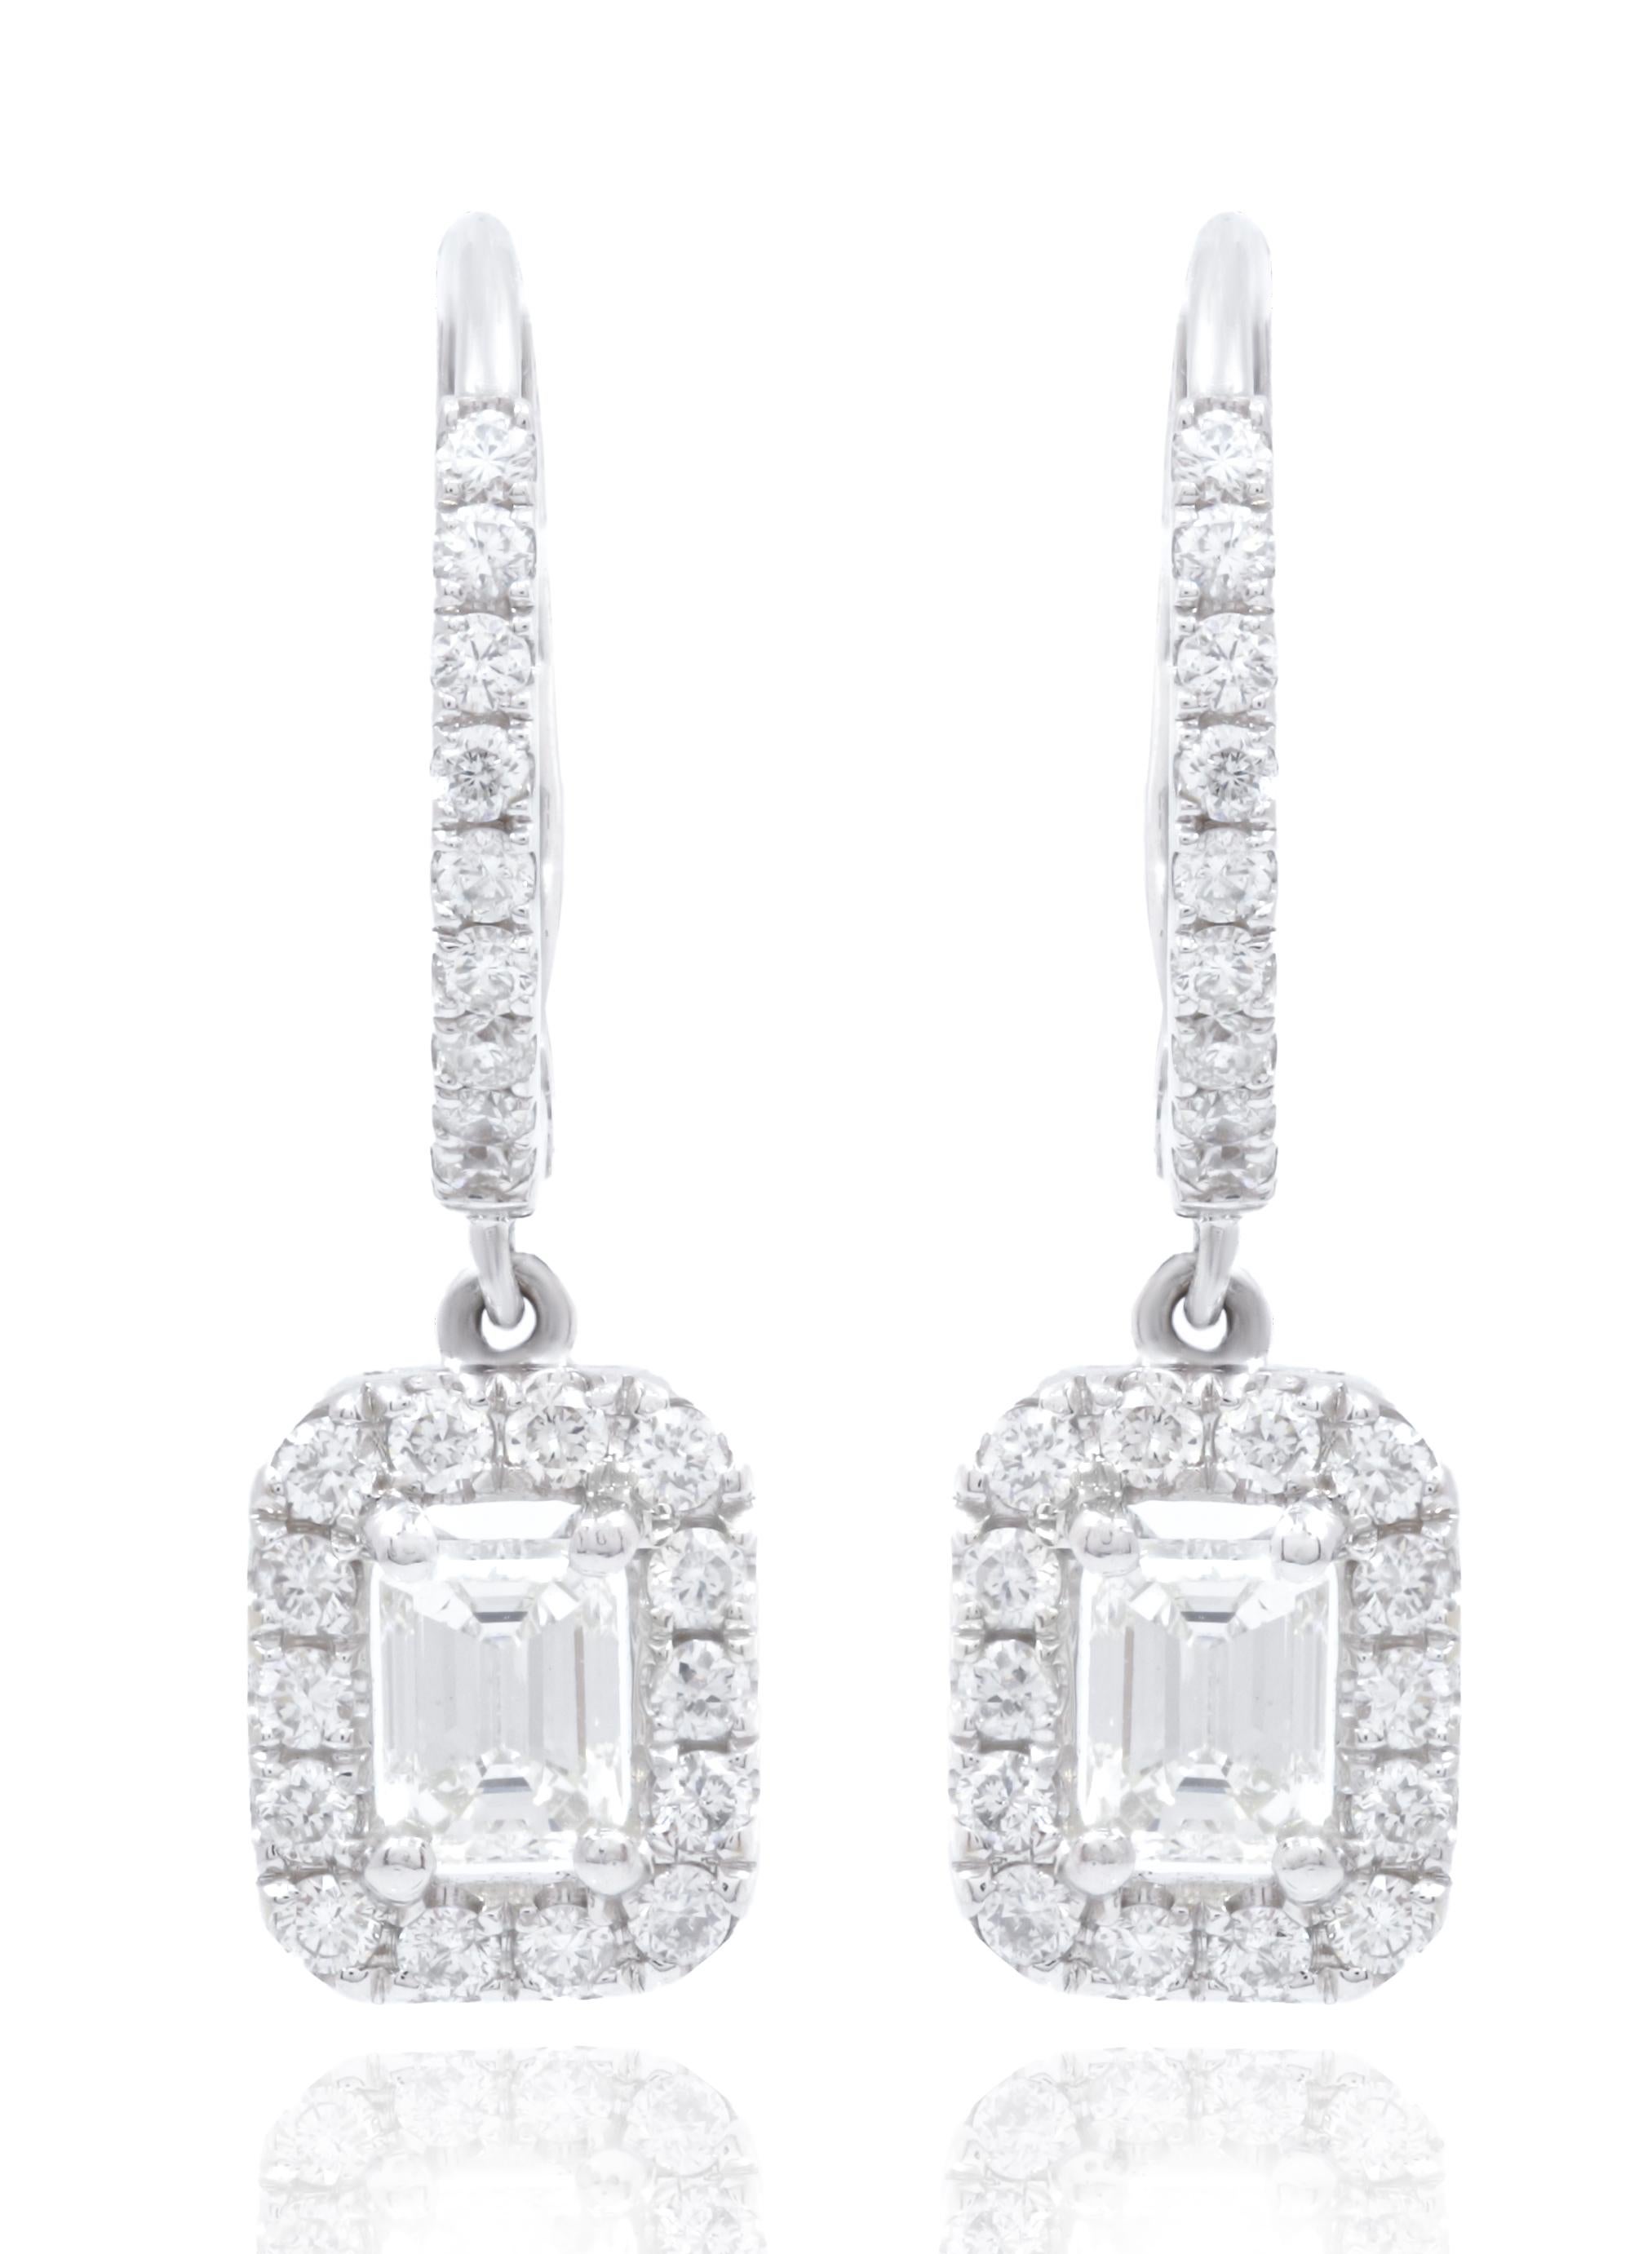 18kt white gold hanging earrings featuring 1.00 cts tw of emerald and round diamonds  GH SI
Diana M. is a leading supplier of top-quality fine jewelry for over 35 years.
Diana M is one-stop shop for all your jewelry shopping, carrying line of